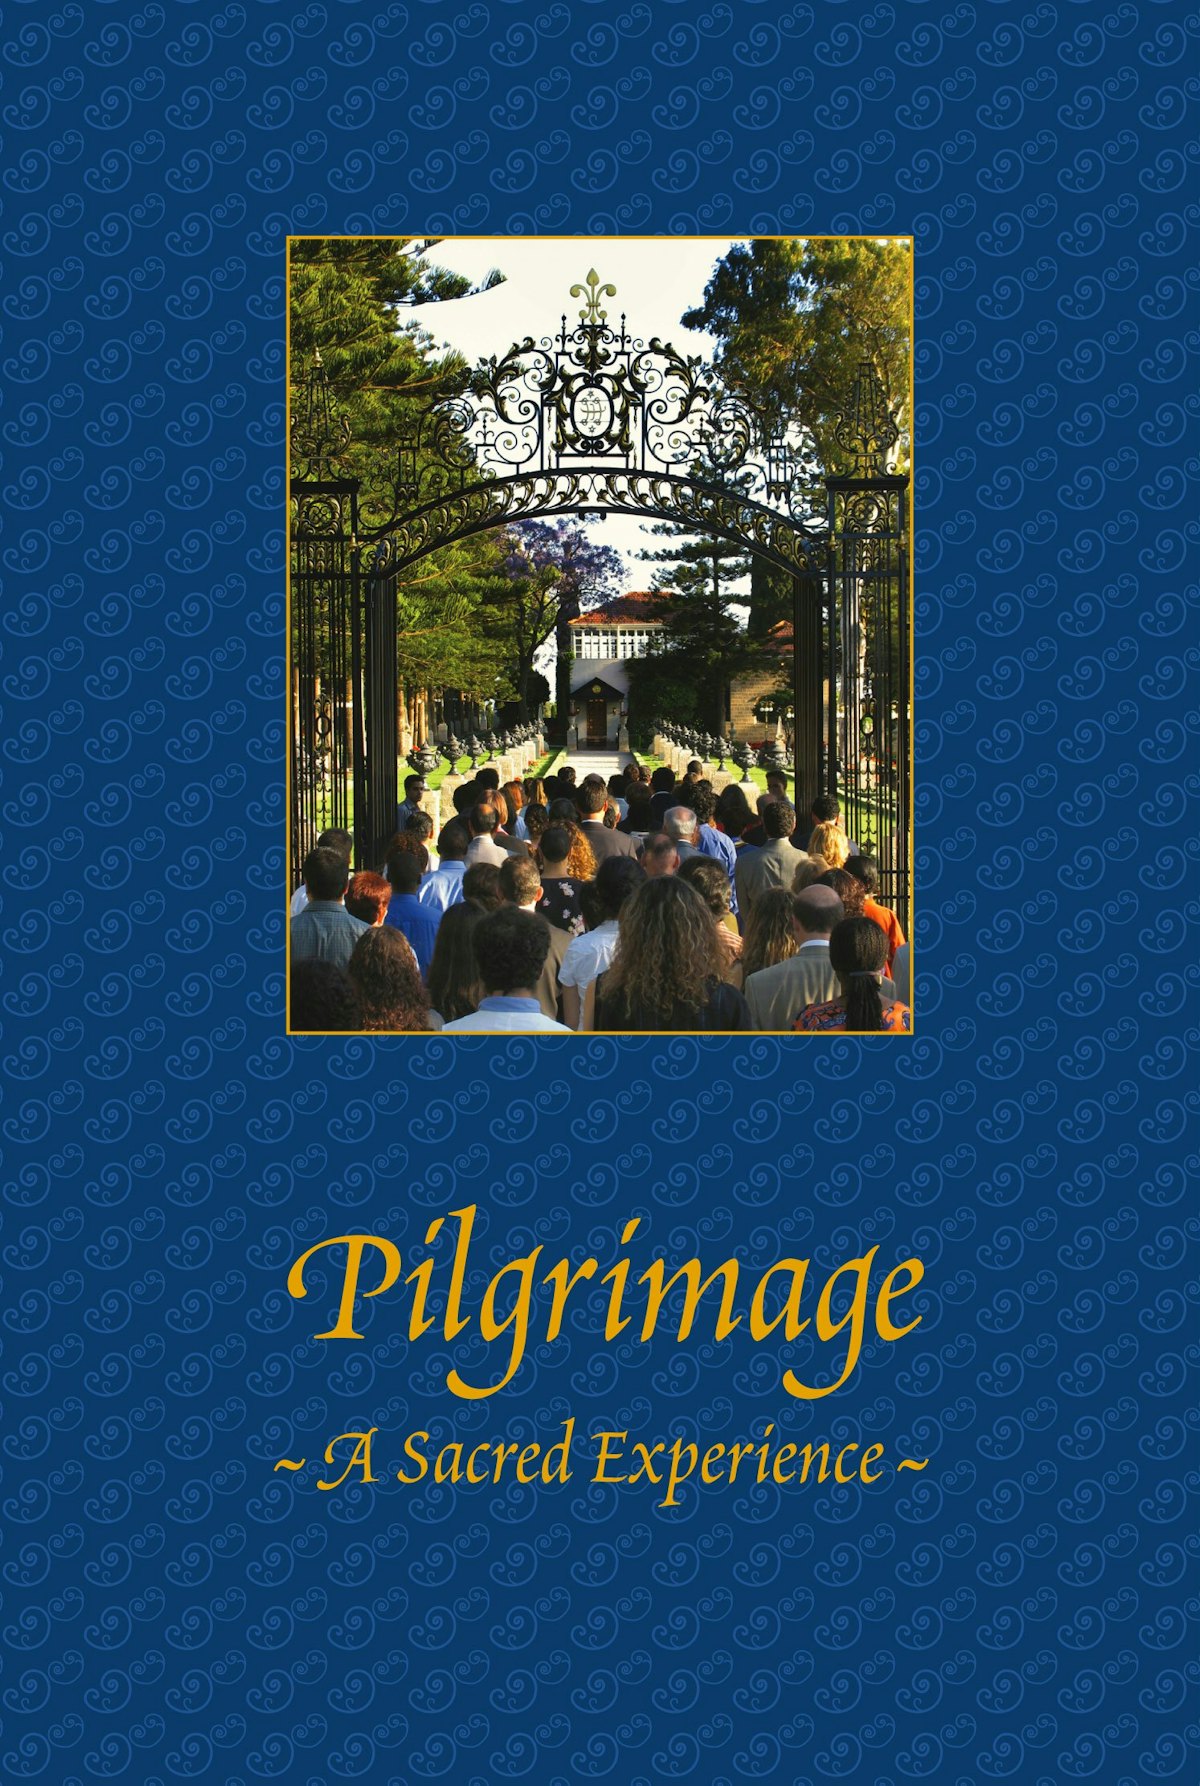 The cover of the DVD of the new film about Baha'i pilgrimage.